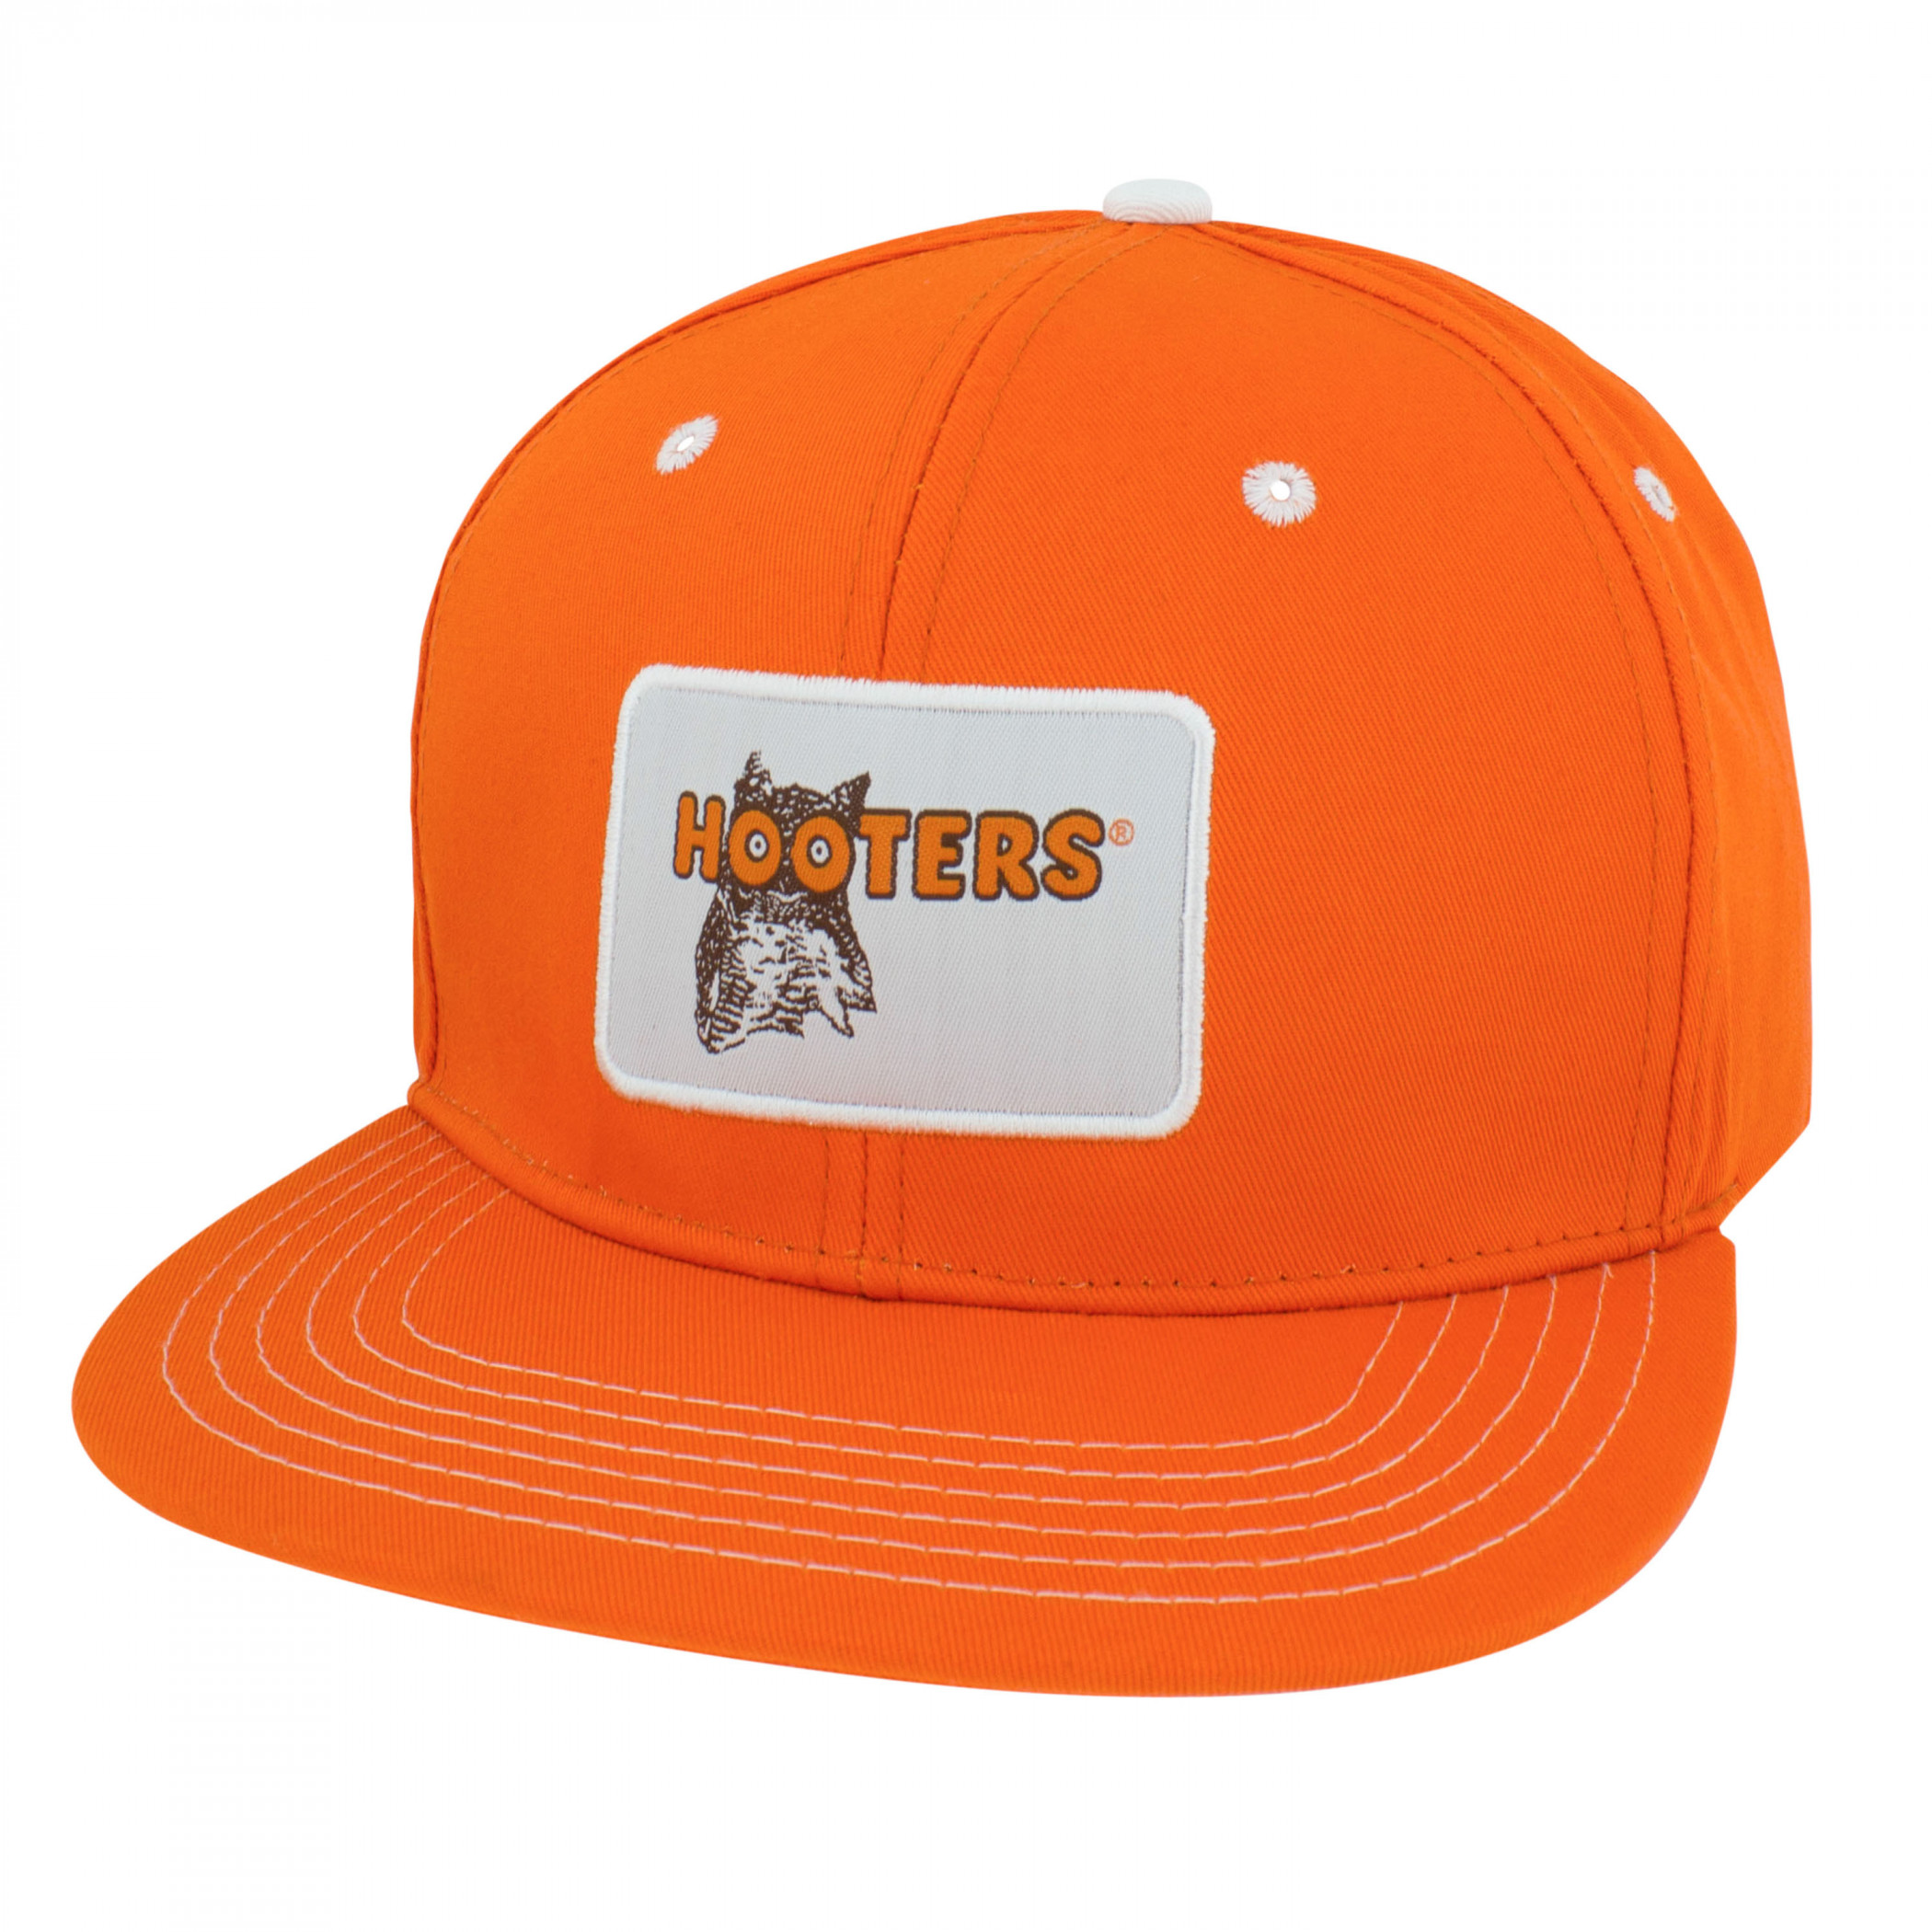 Hooters Logo Patch Flat Bill Adjustable Hat